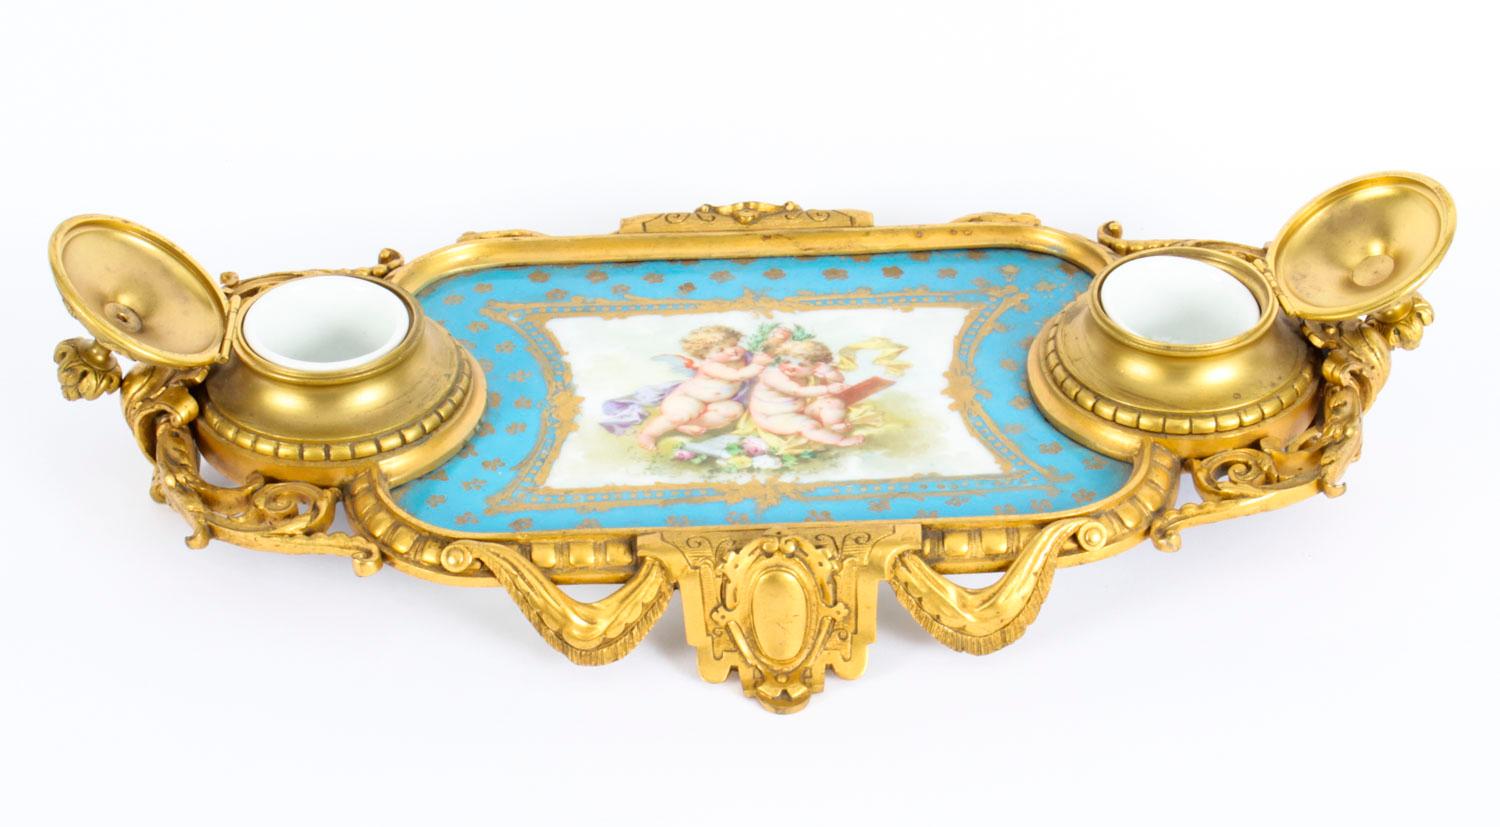 Antique French Ormolu and Sèvres Porcelain Standish Inkstand, 19th Century 7